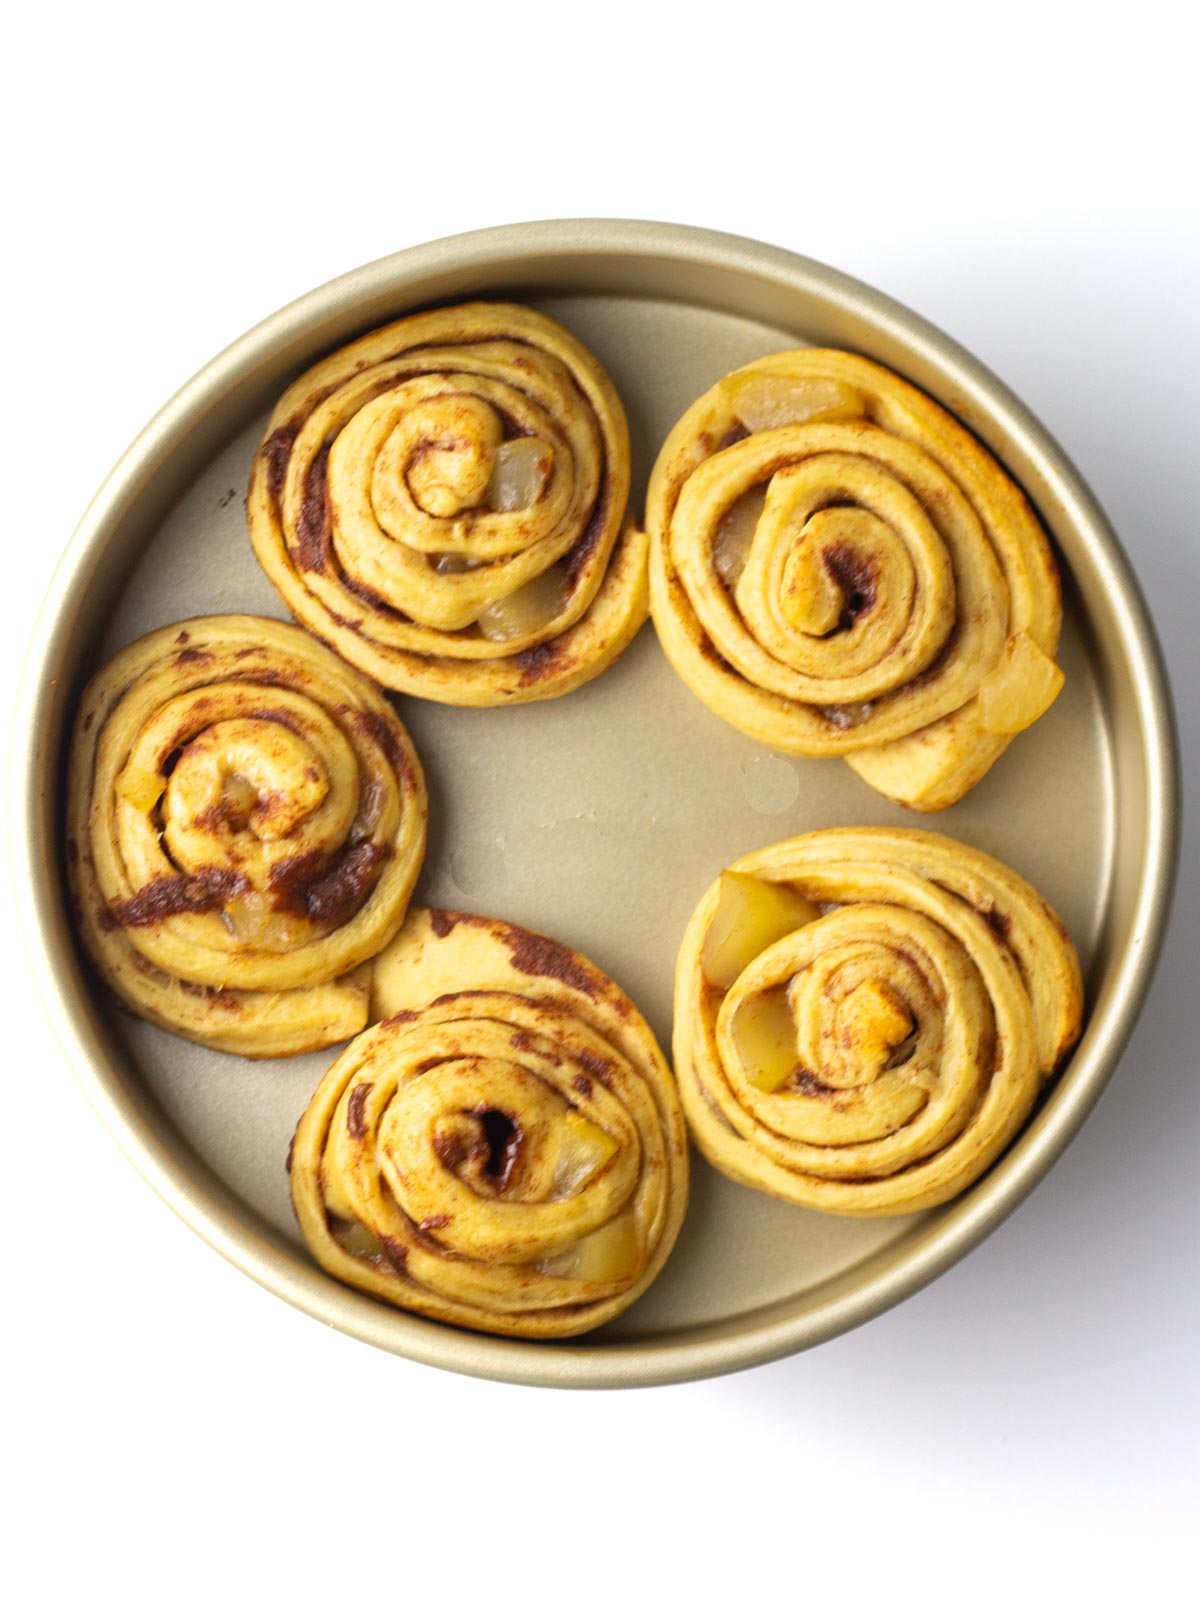 Five baked apple pie cinnamon rolls in a gold, round cake pan.